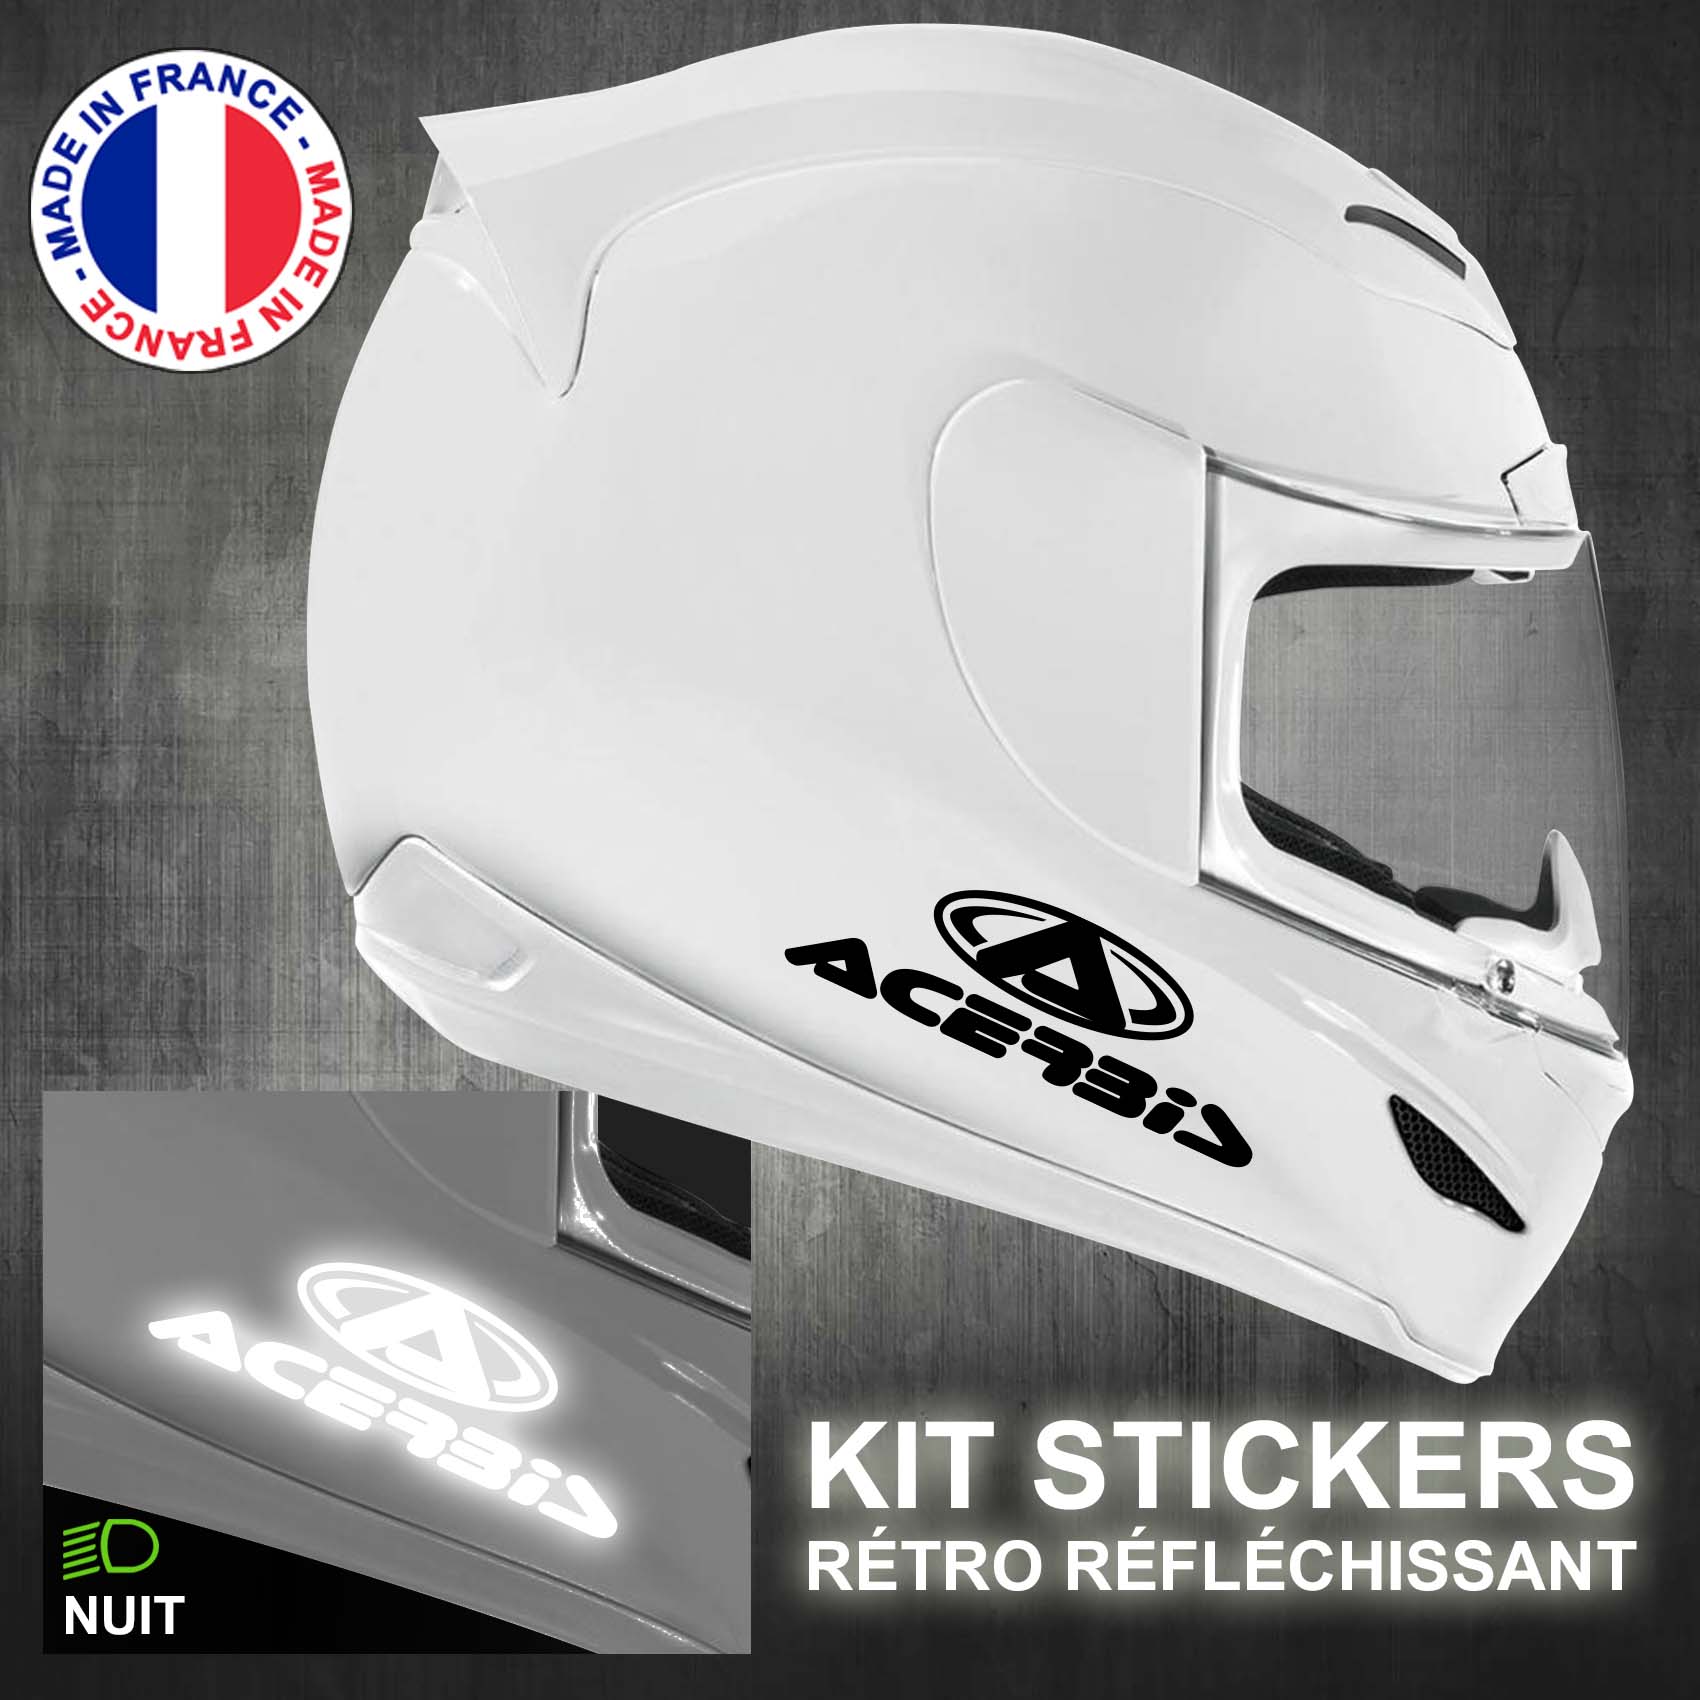 stickers-casque-moto-acerbis-ref1-retro-reflechissant-autocollant-moto-velo-tuning-racing-route-sticker-casques-adhesif-scooter-nuit-securite-decals-personnalise-personnalisable-min